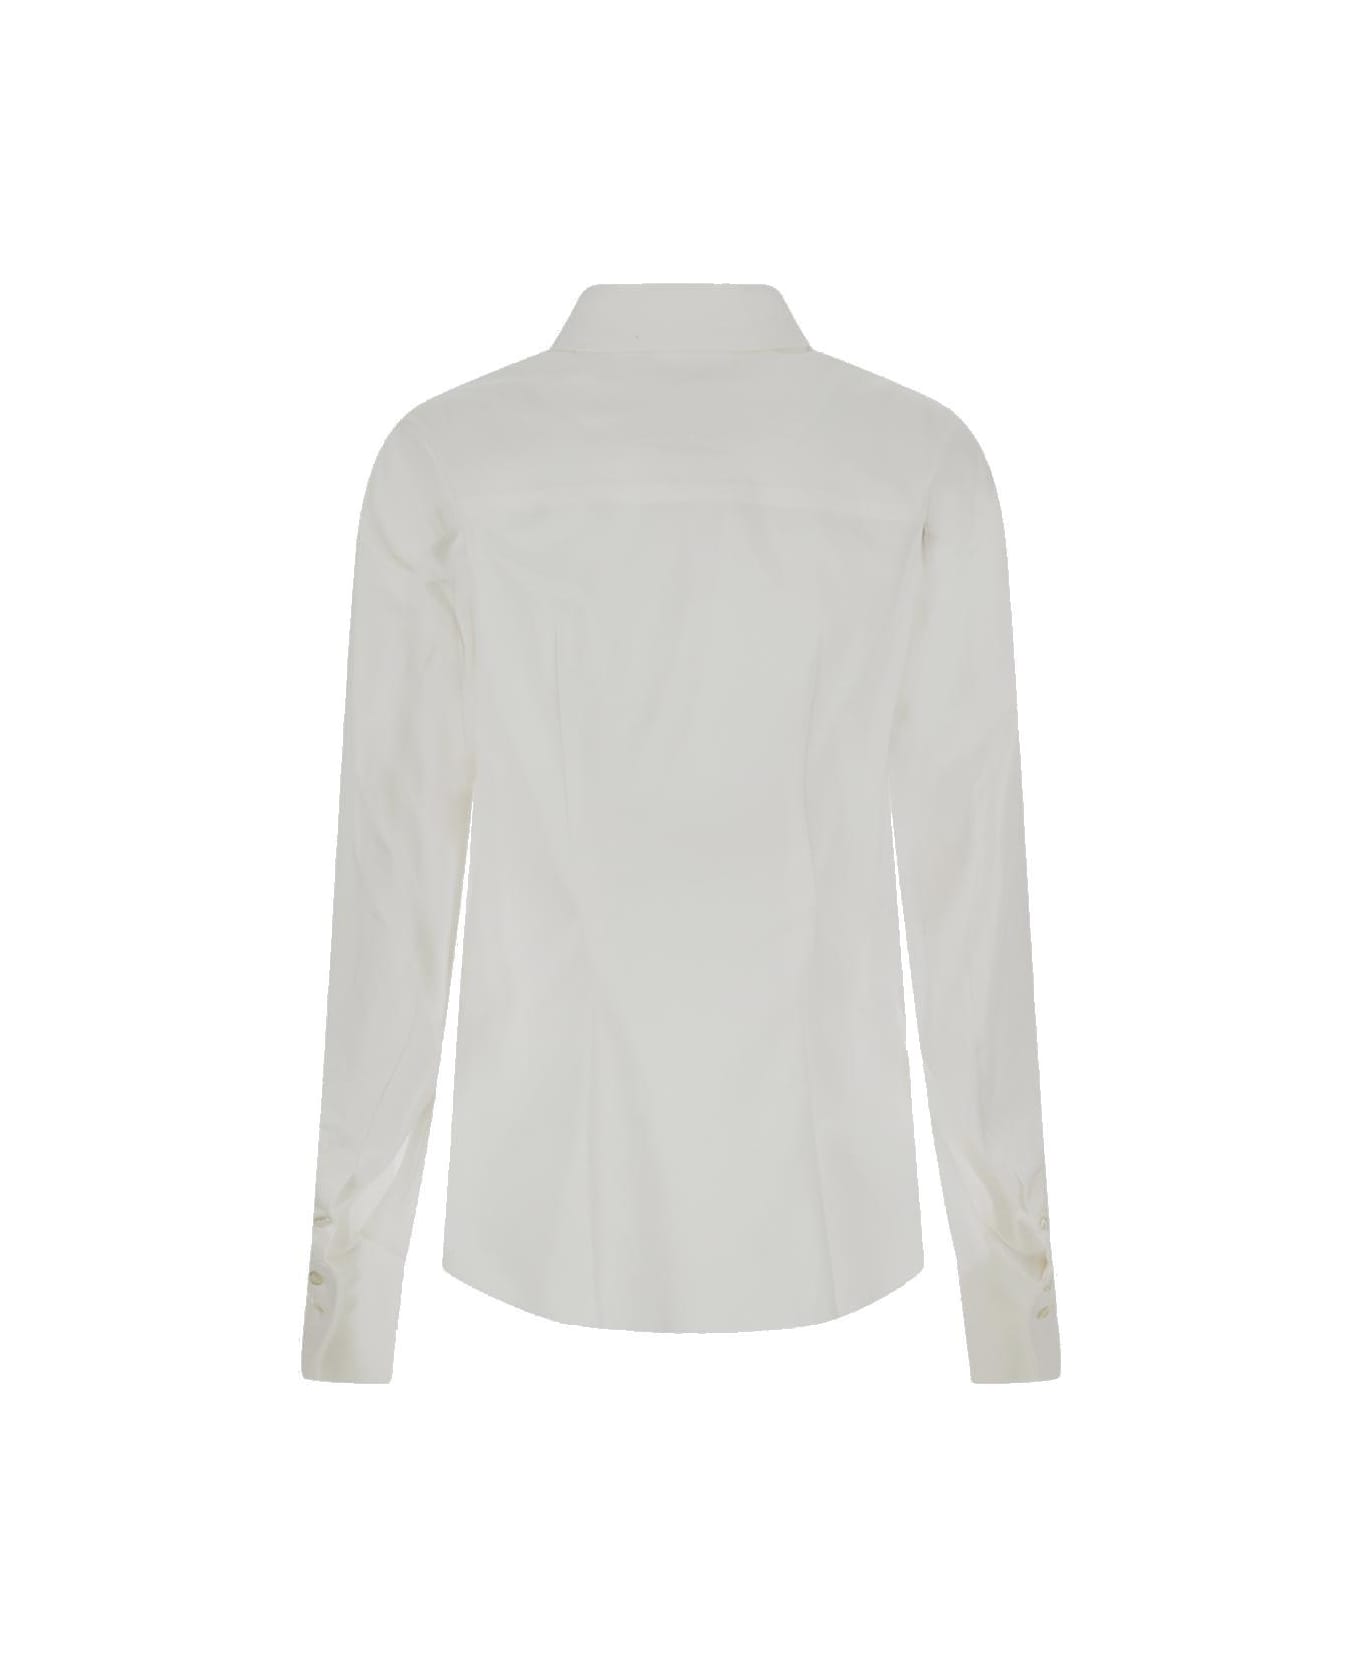 SportMax Button-up Long Sleeved Shirt - WHITE